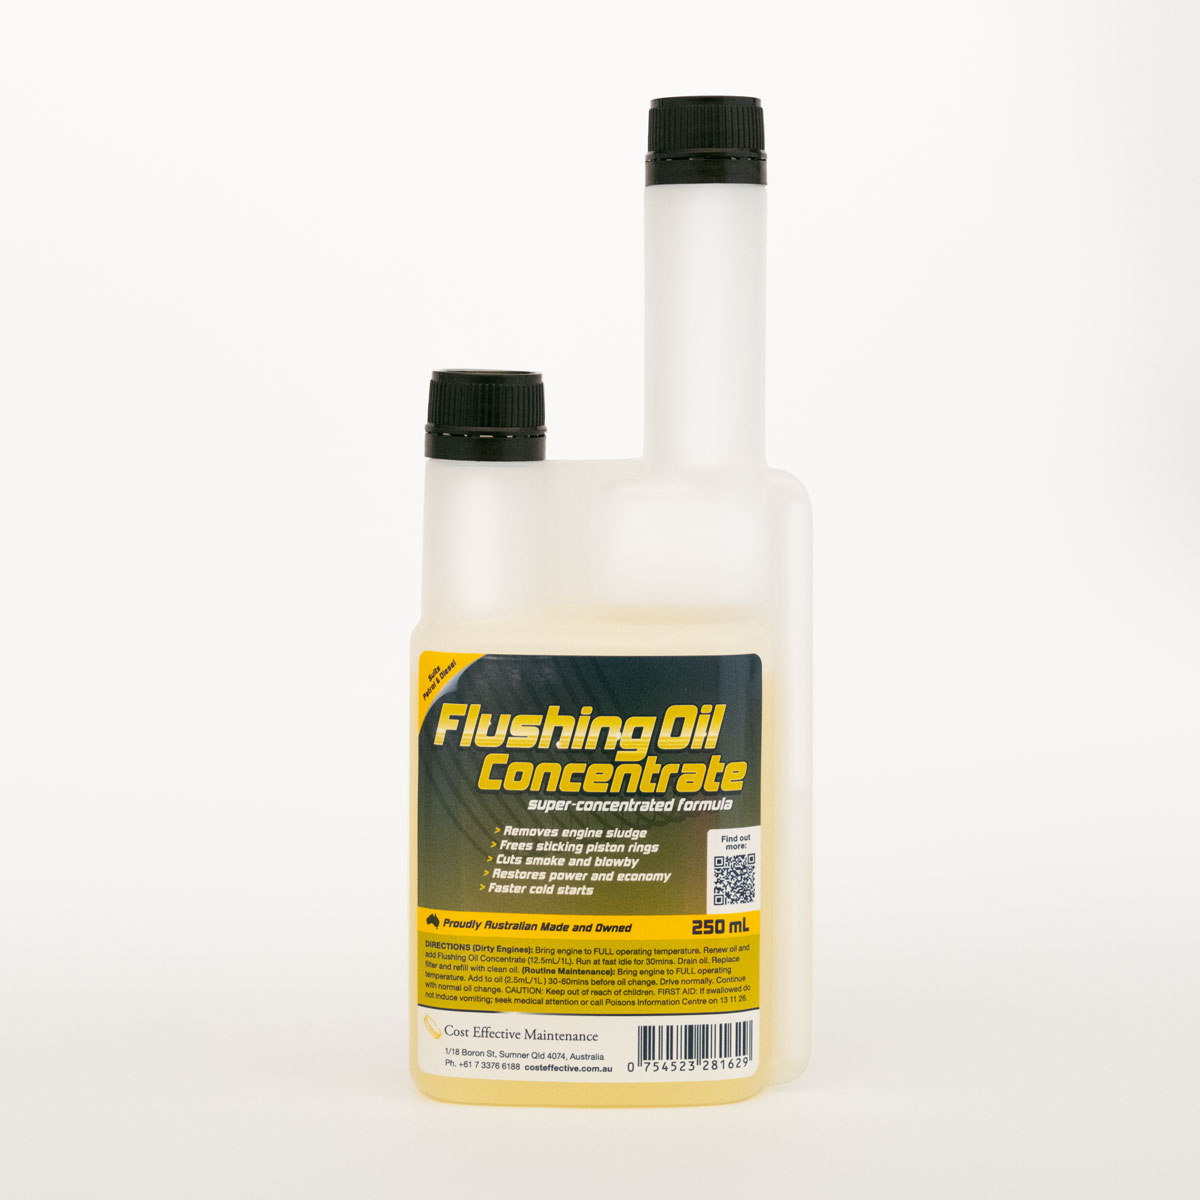 Flushing-Oil-Concentrate-250ml-1